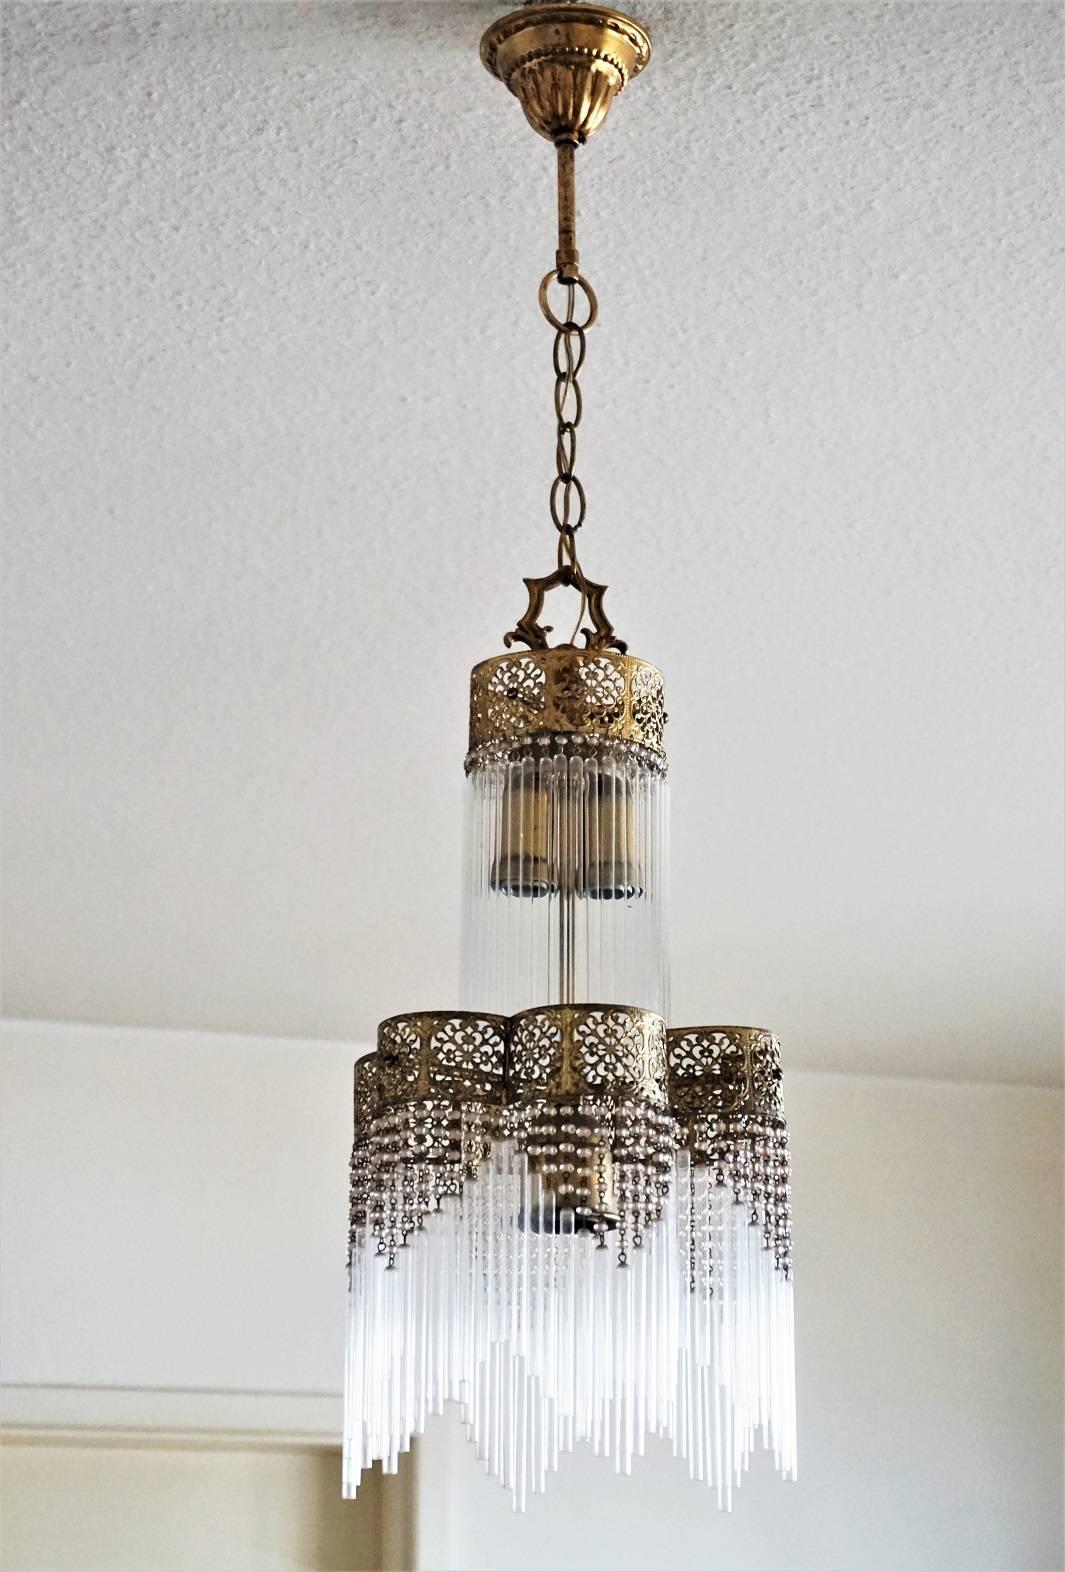 Lovely Art Nouveau style gilt brass three-light chandelier with glass rods and rose color glass pearls impressive lighting effect!


Measures:
Total height 31.50 in (80 cm) - hanging chain can be shortened
Diameter 9 in (22 cm).
  